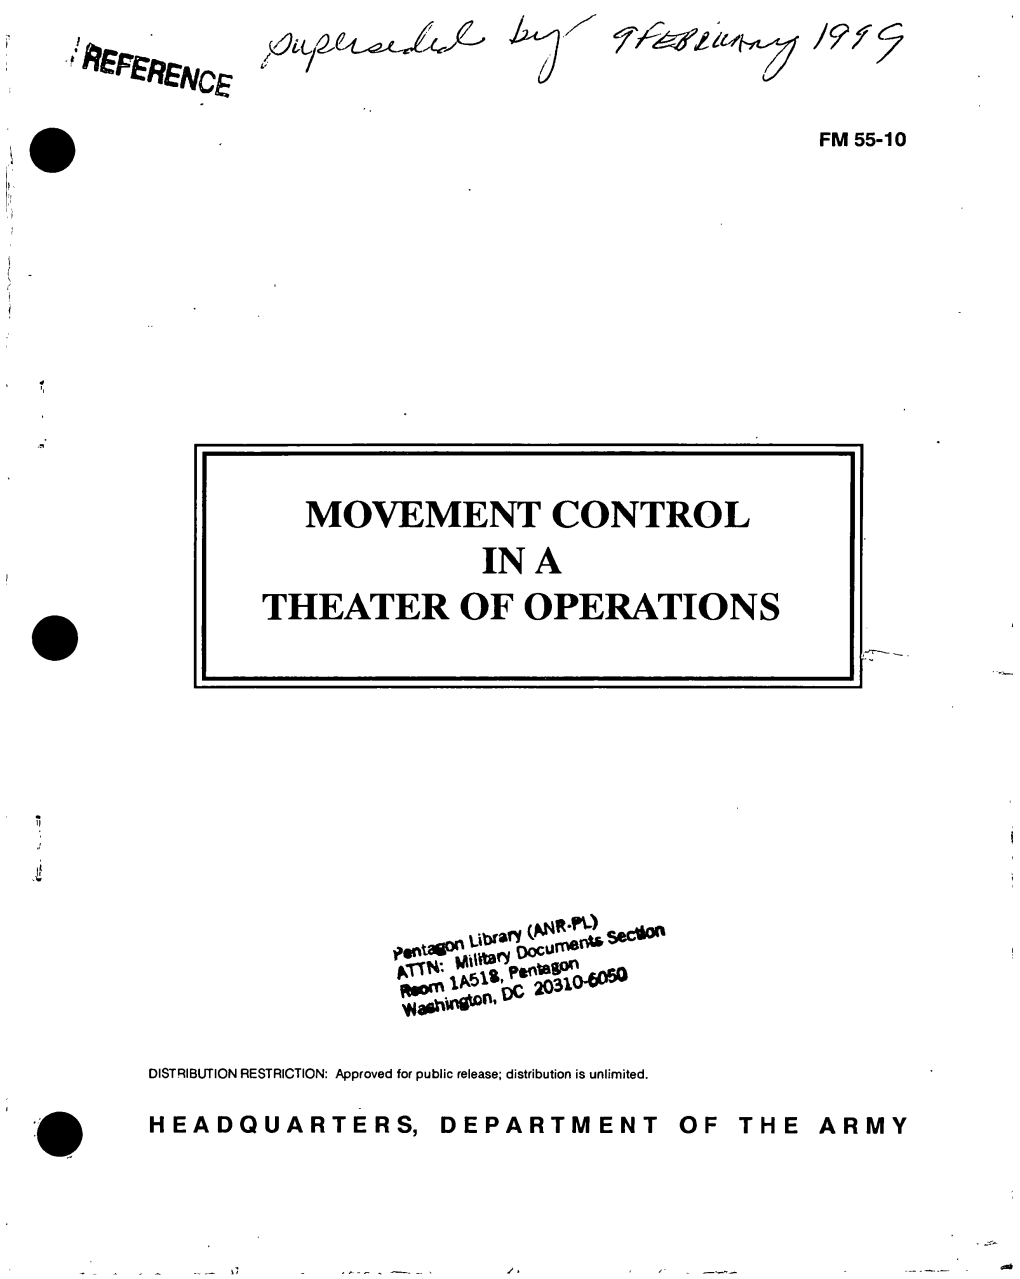 Movement Control in a Theater of Operations Ss®?Sss